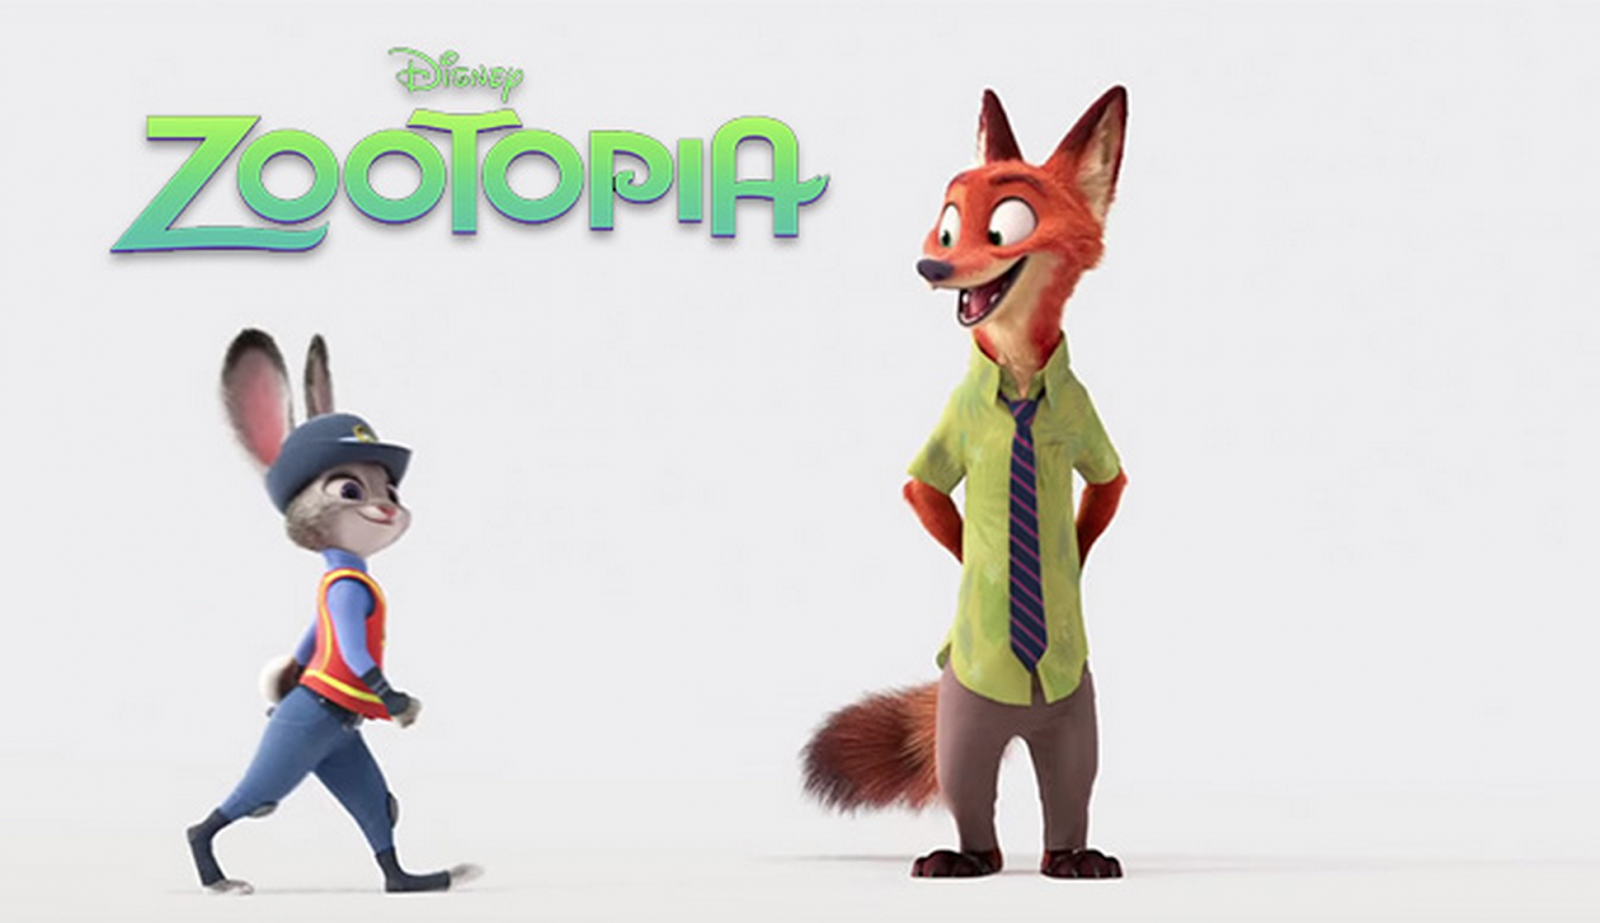 Zootopia Wallpapers 2016 - Boss Wallpapers 5k, 4k and 8k Ultra HD, UHD Download Free